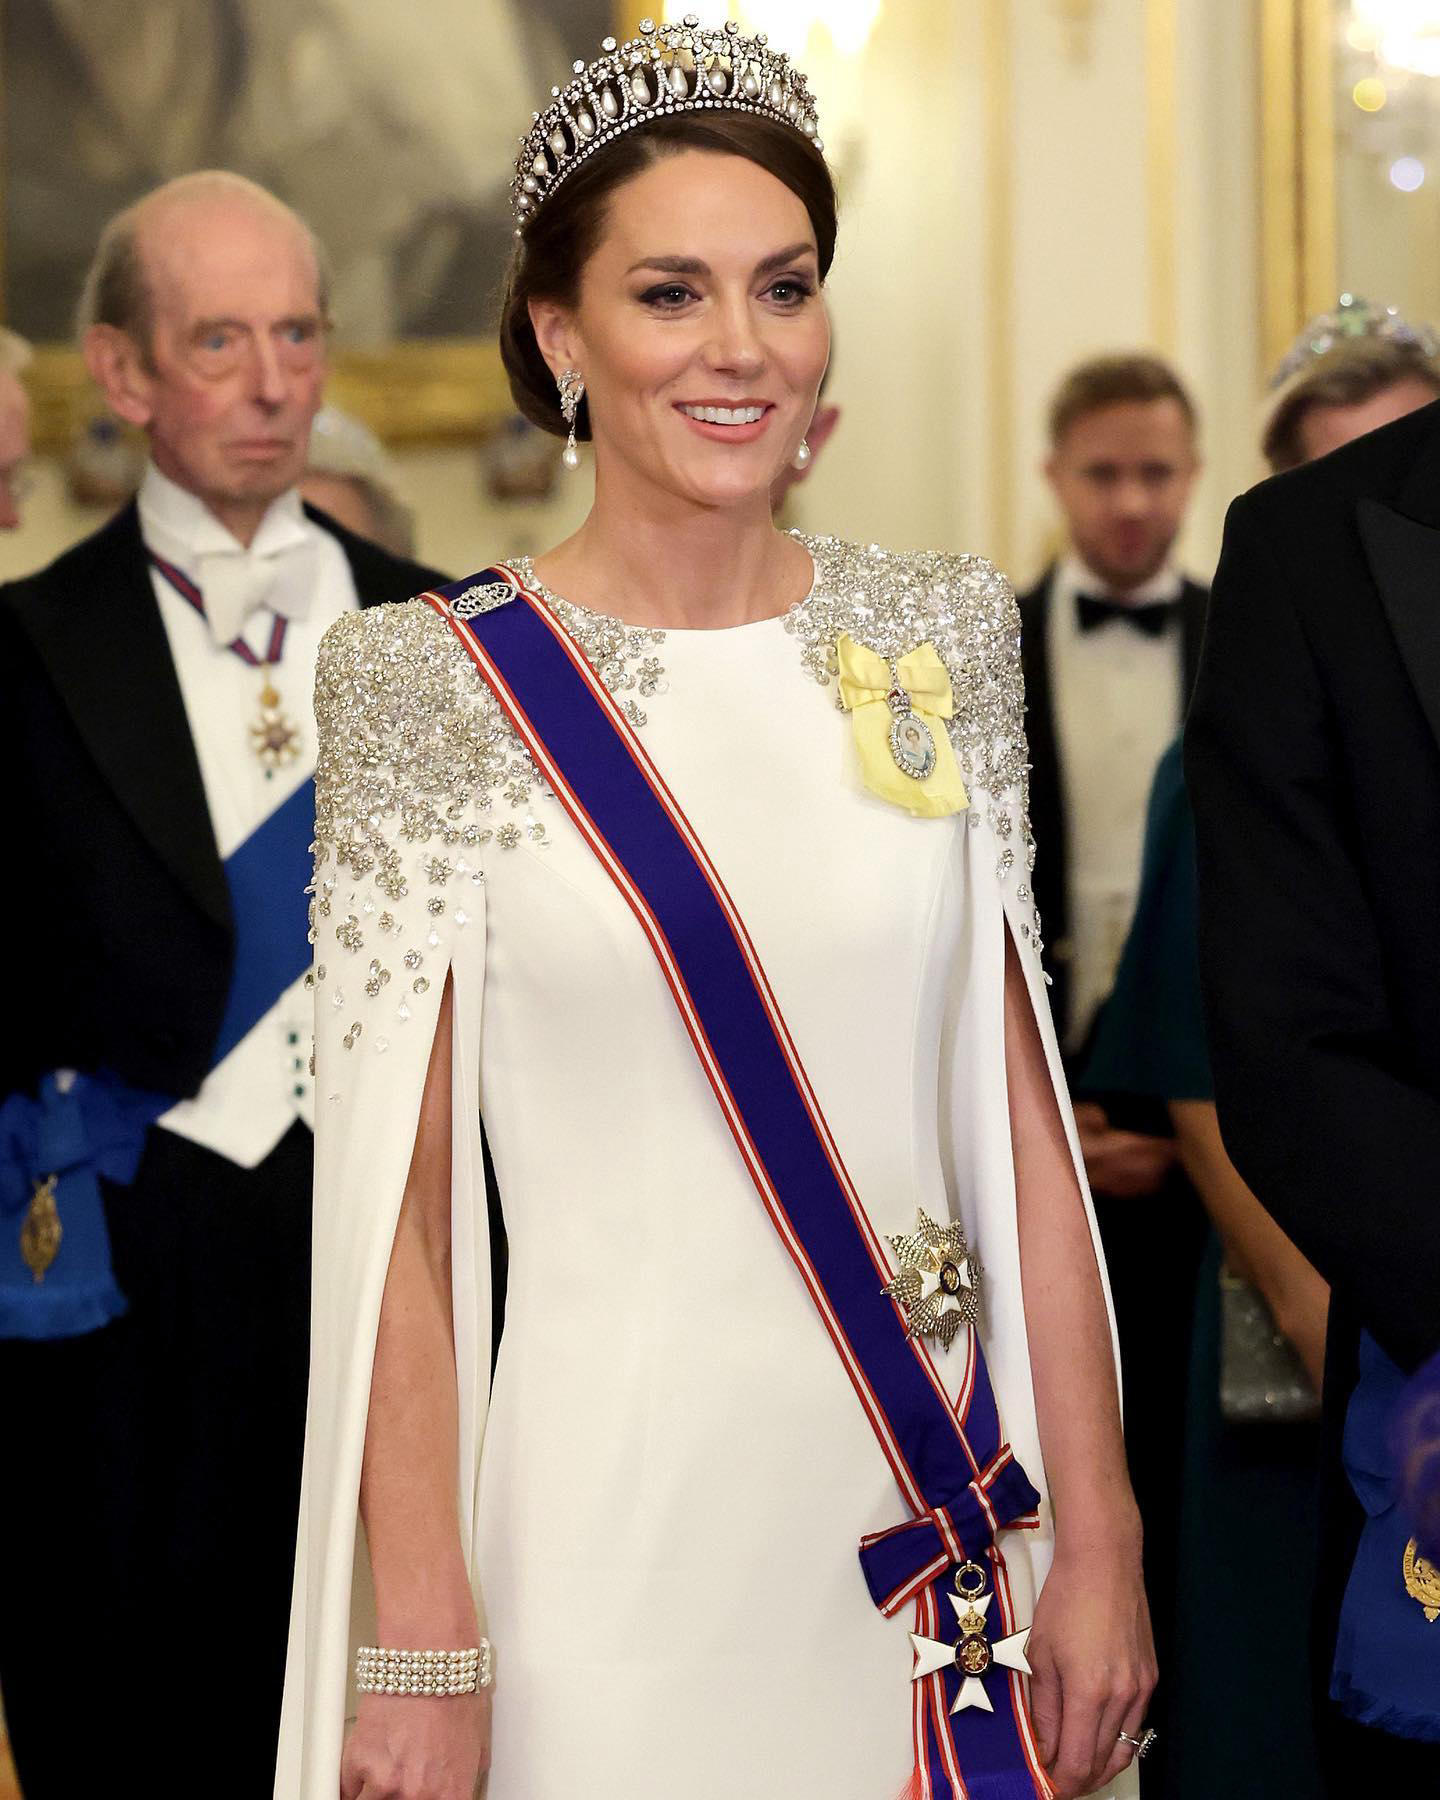 Vogue - Kate Middleton has made her first black-tie appearance as the Princess of Wales, and for the